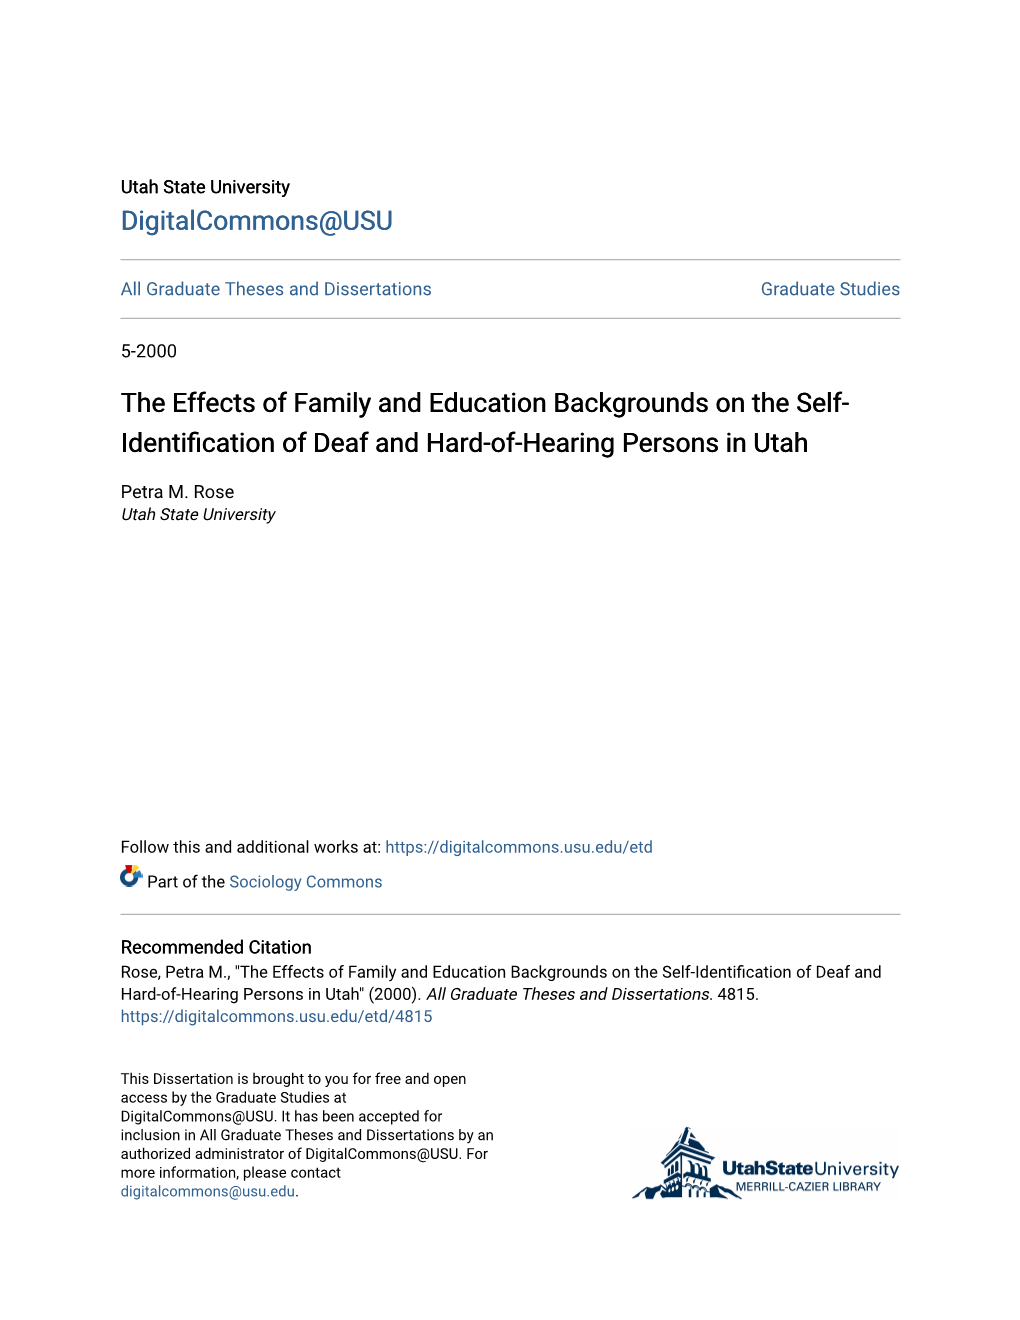 The Effects of Family and Education Backgrounds on the Self- Identification of Deaf and Hard-Of-Hearing Persons in Utah